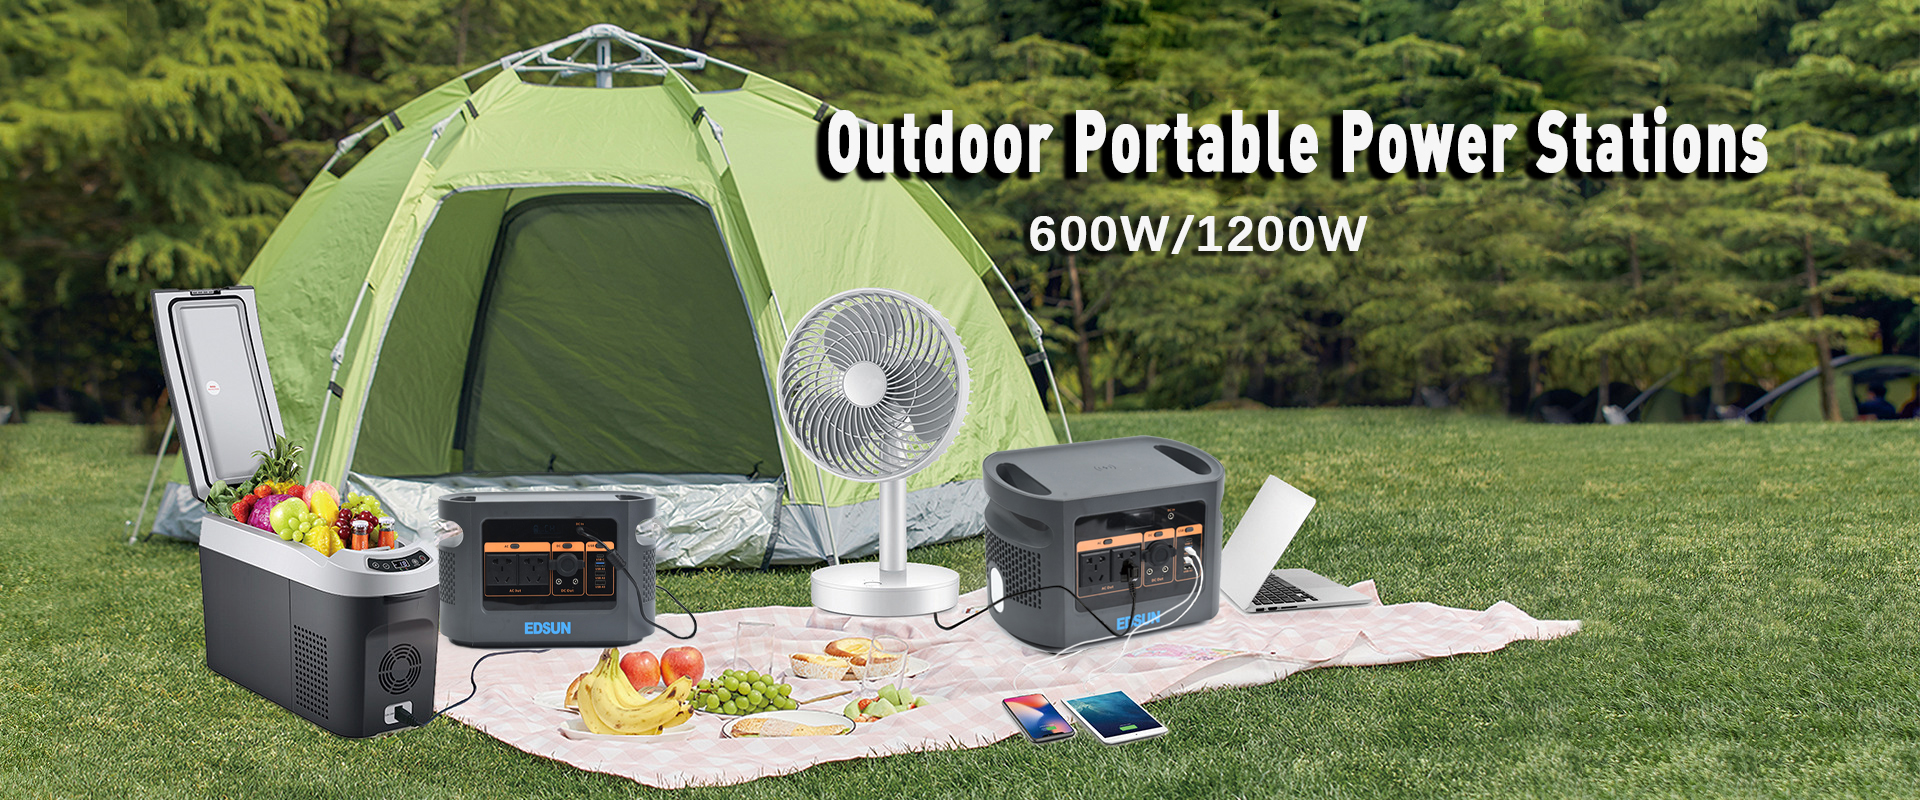 Emergency Portable Power Station Solar Generator Mobile Energy Storage Power Supply For Outdoor